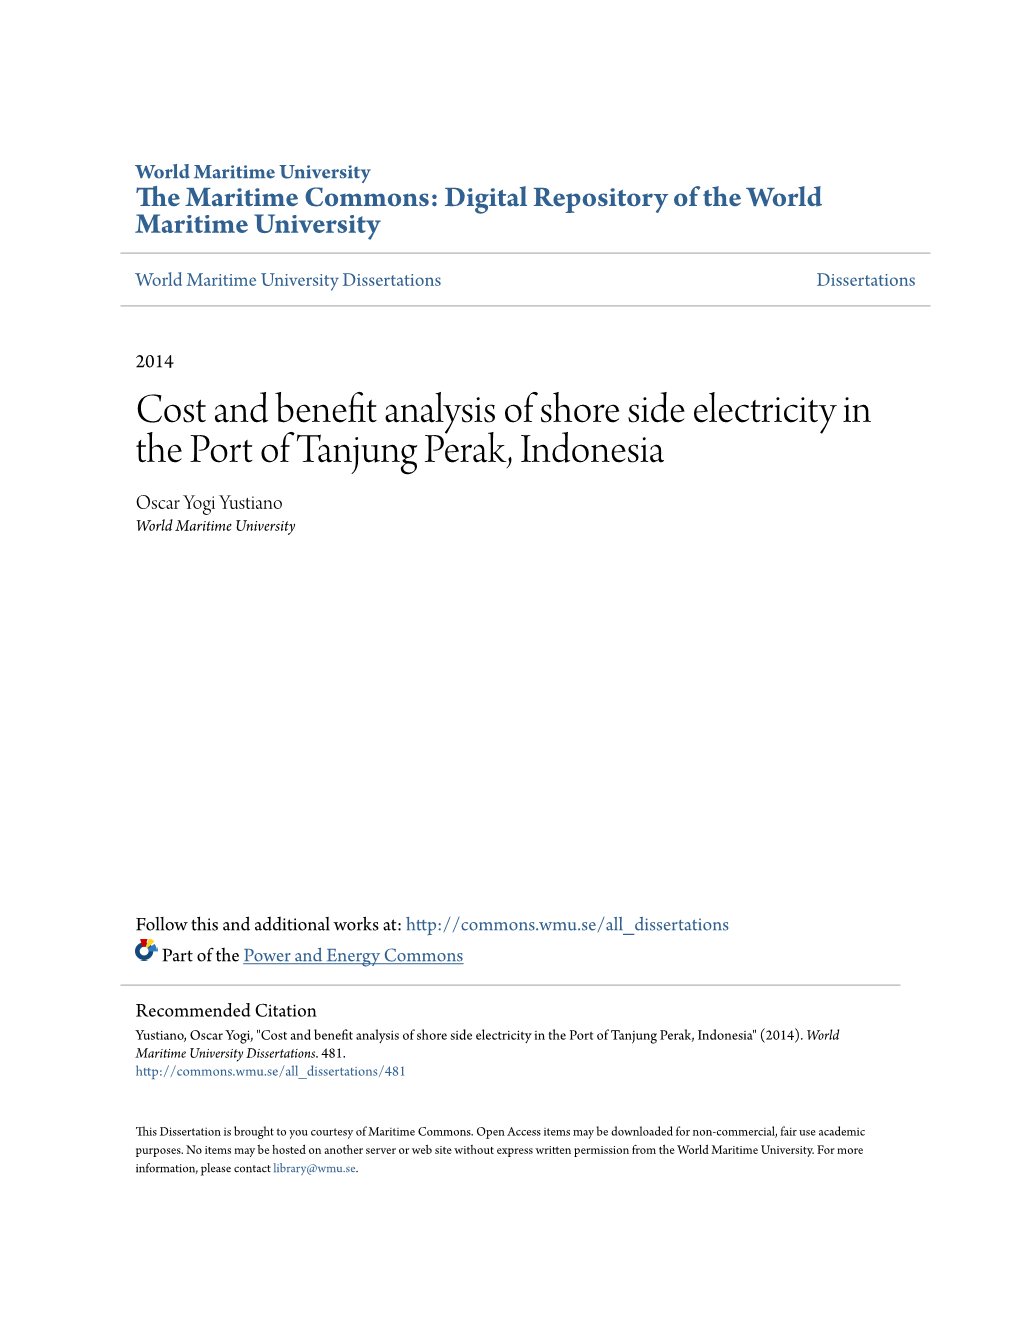 Cost and Benefit Analysis of Shore Side Electricity in the Port of Tanjung Perak, Indonesia